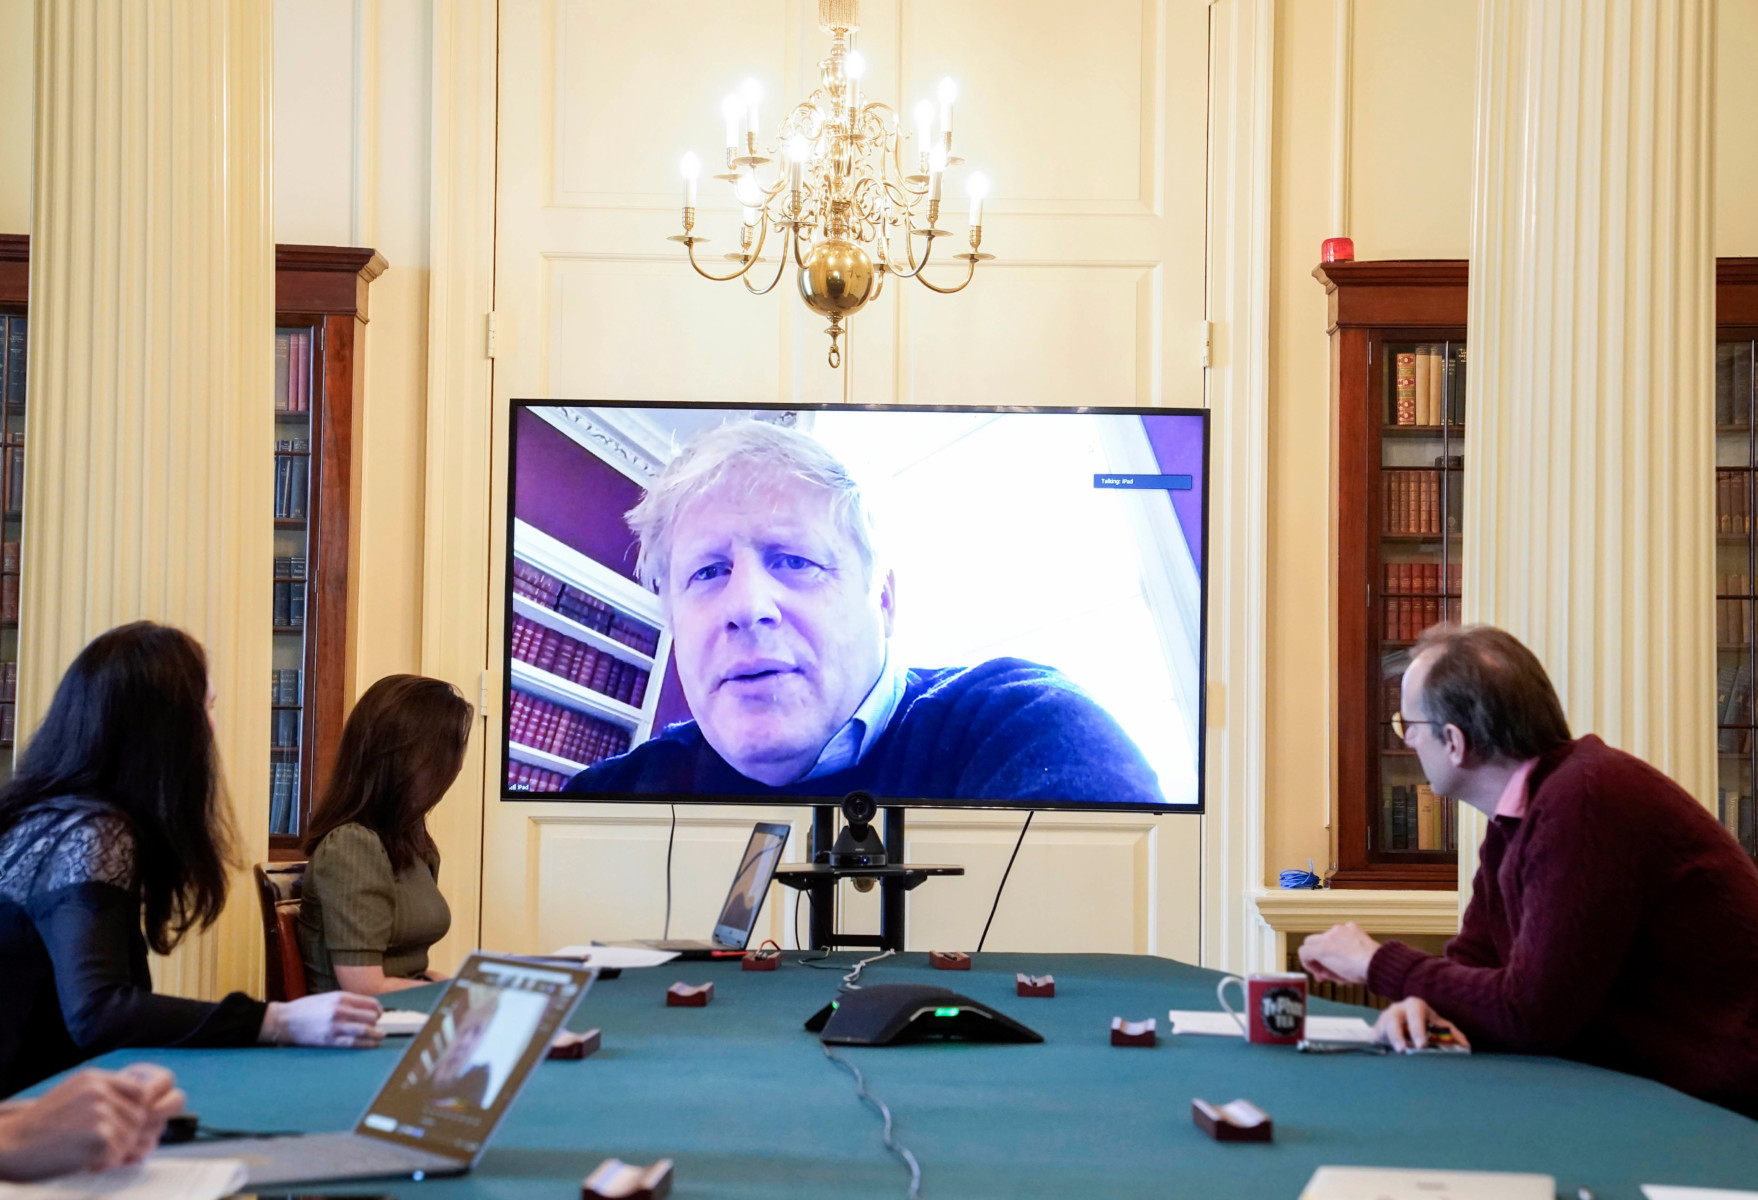 The PM is seen on screen discussing the Covid-19 situation with officials today as he self-isolates after testing positive for coronavirus